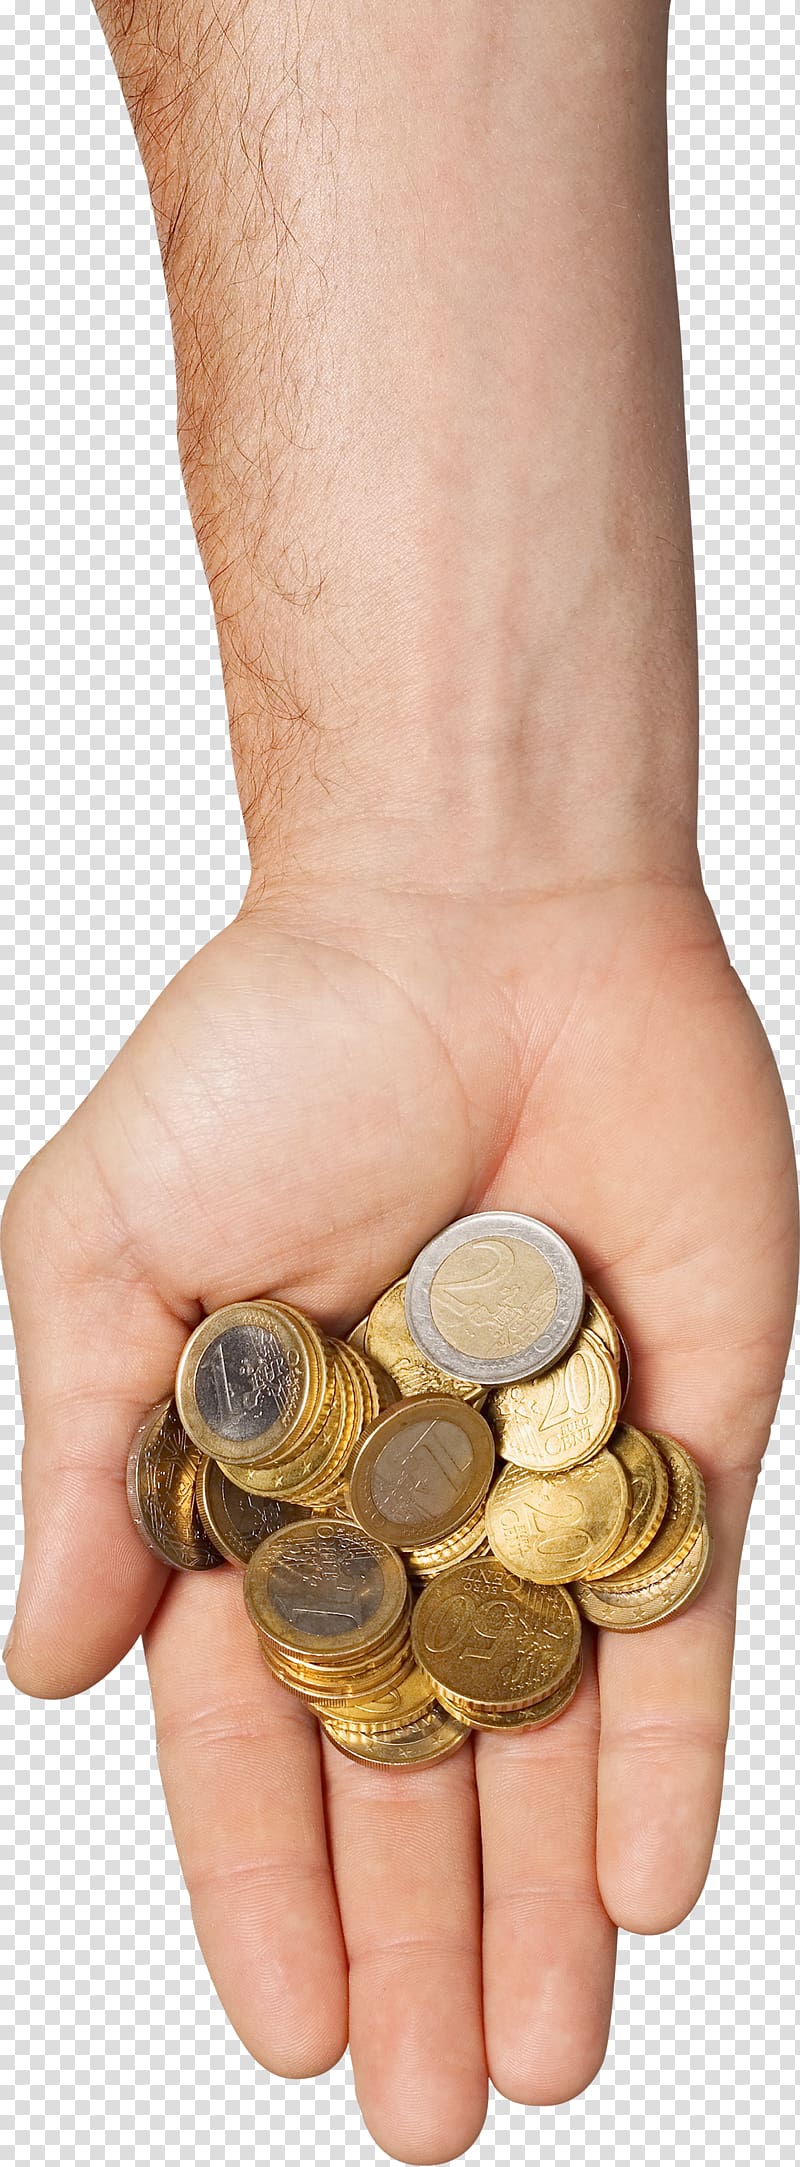 Money Coin, Money in hand transparent background PNG clipart